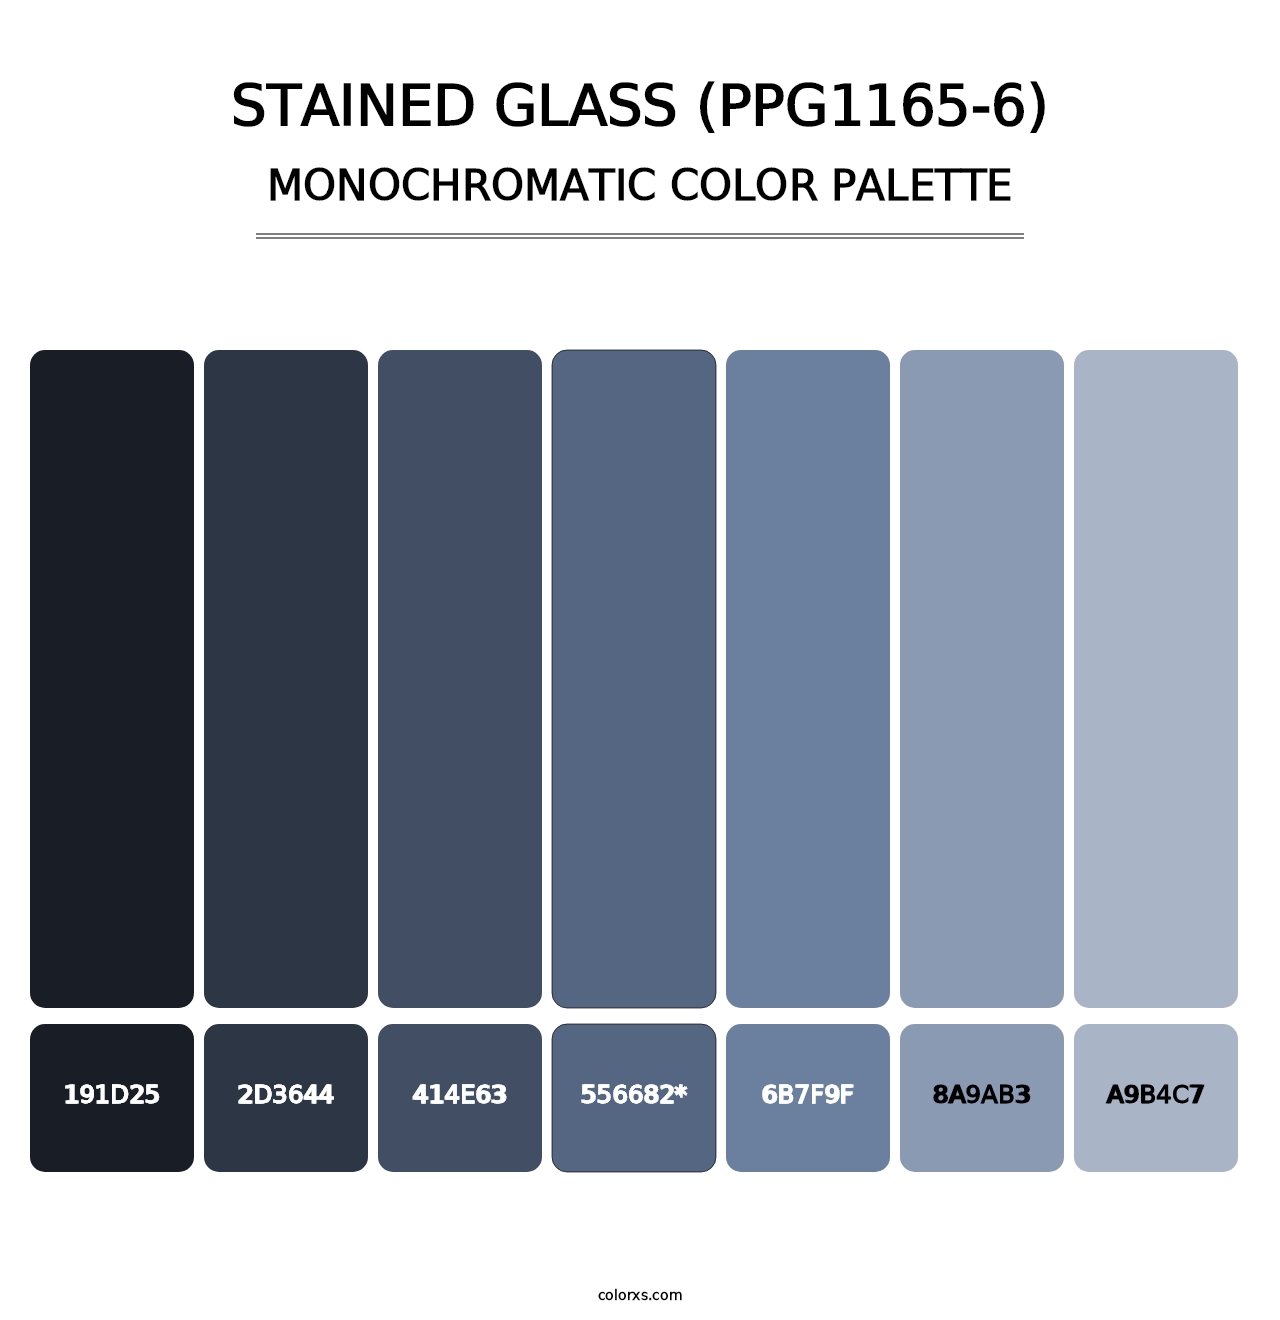 Stained Glass (PPG1165-6) - Monochromatic Color Palette